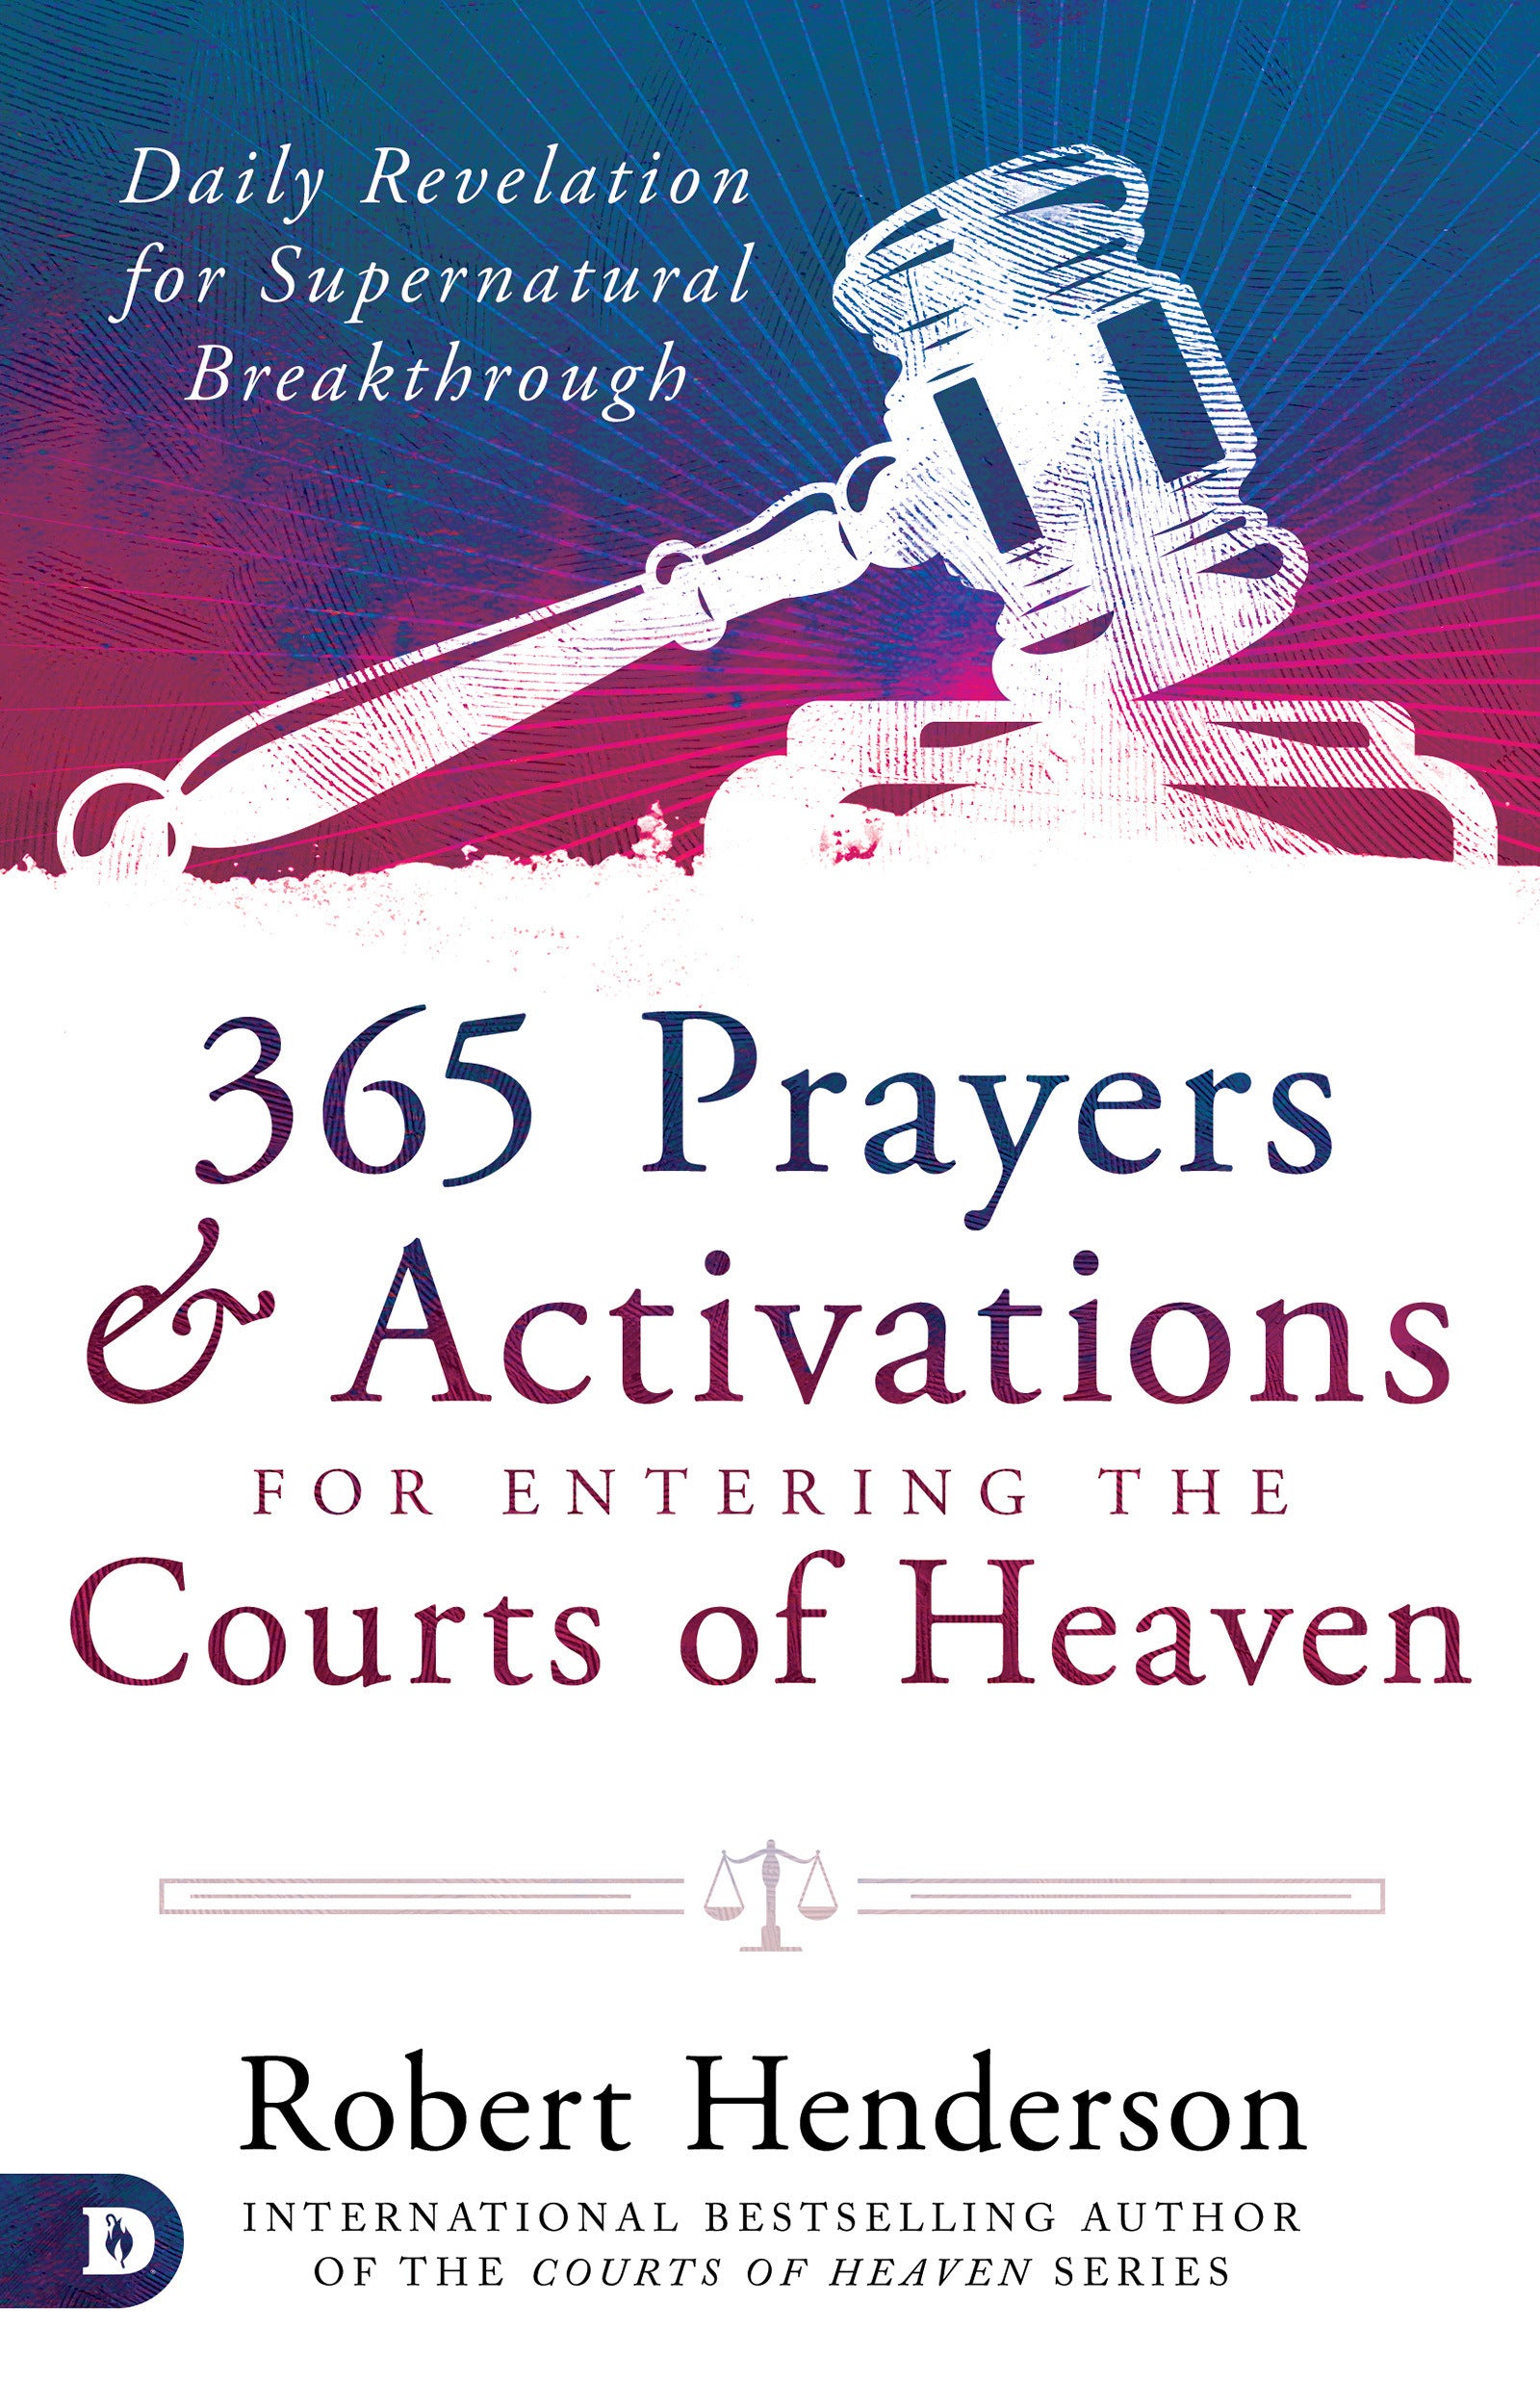 Image of 365 Prayers and Activations for Entering the Courts of Heaven other